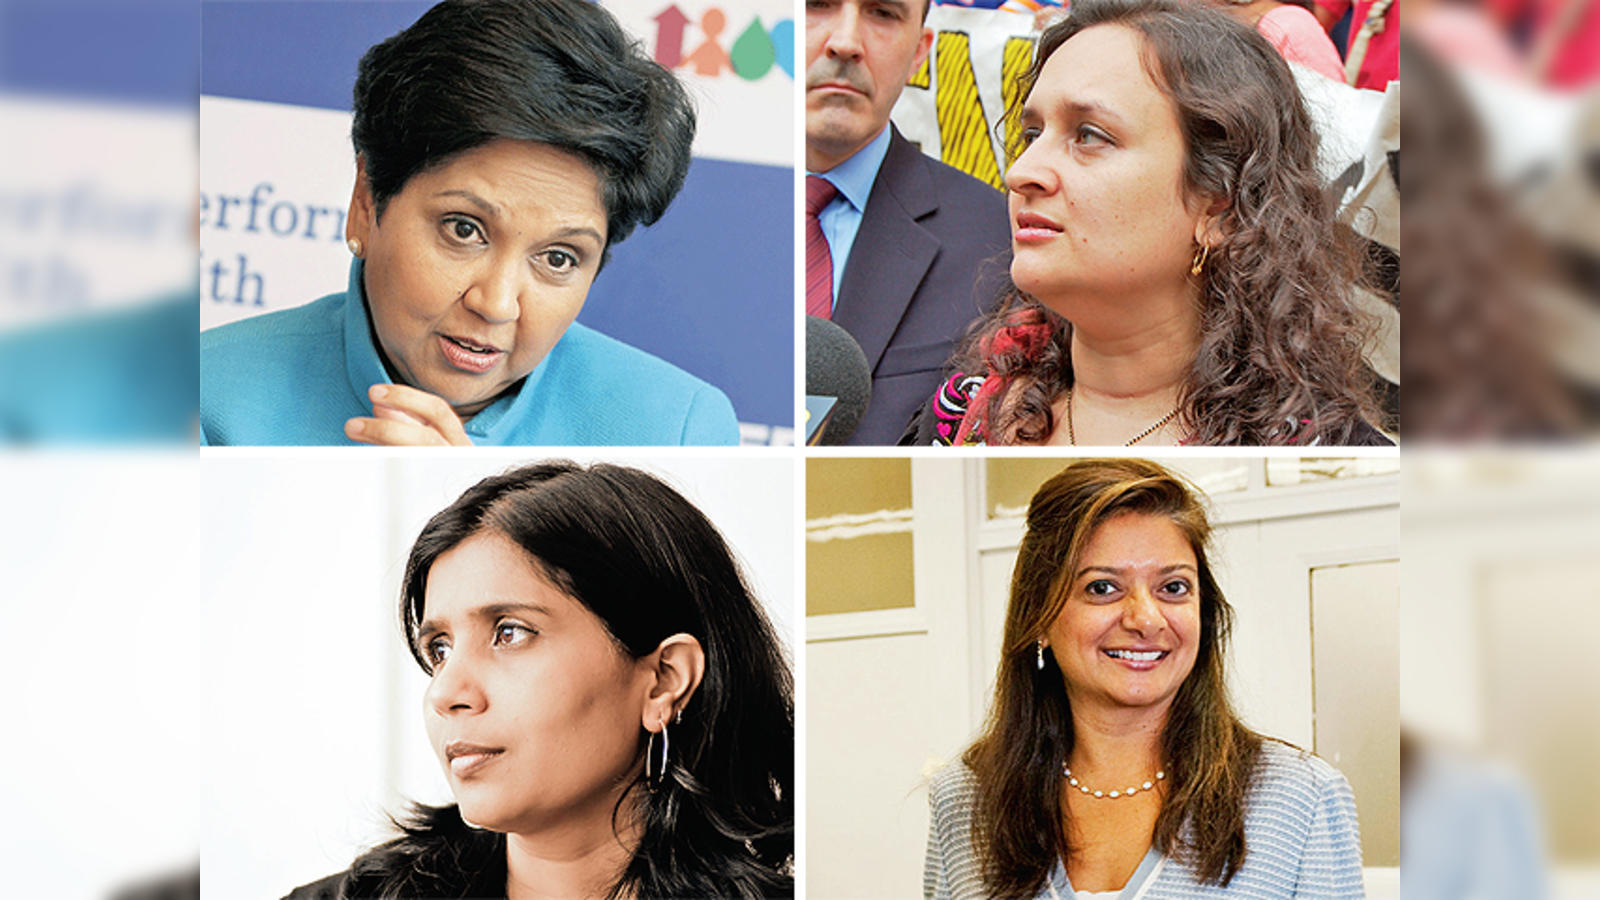 Indian Entrepreneurs: 4 Mother-Daughter Led Businesses In India